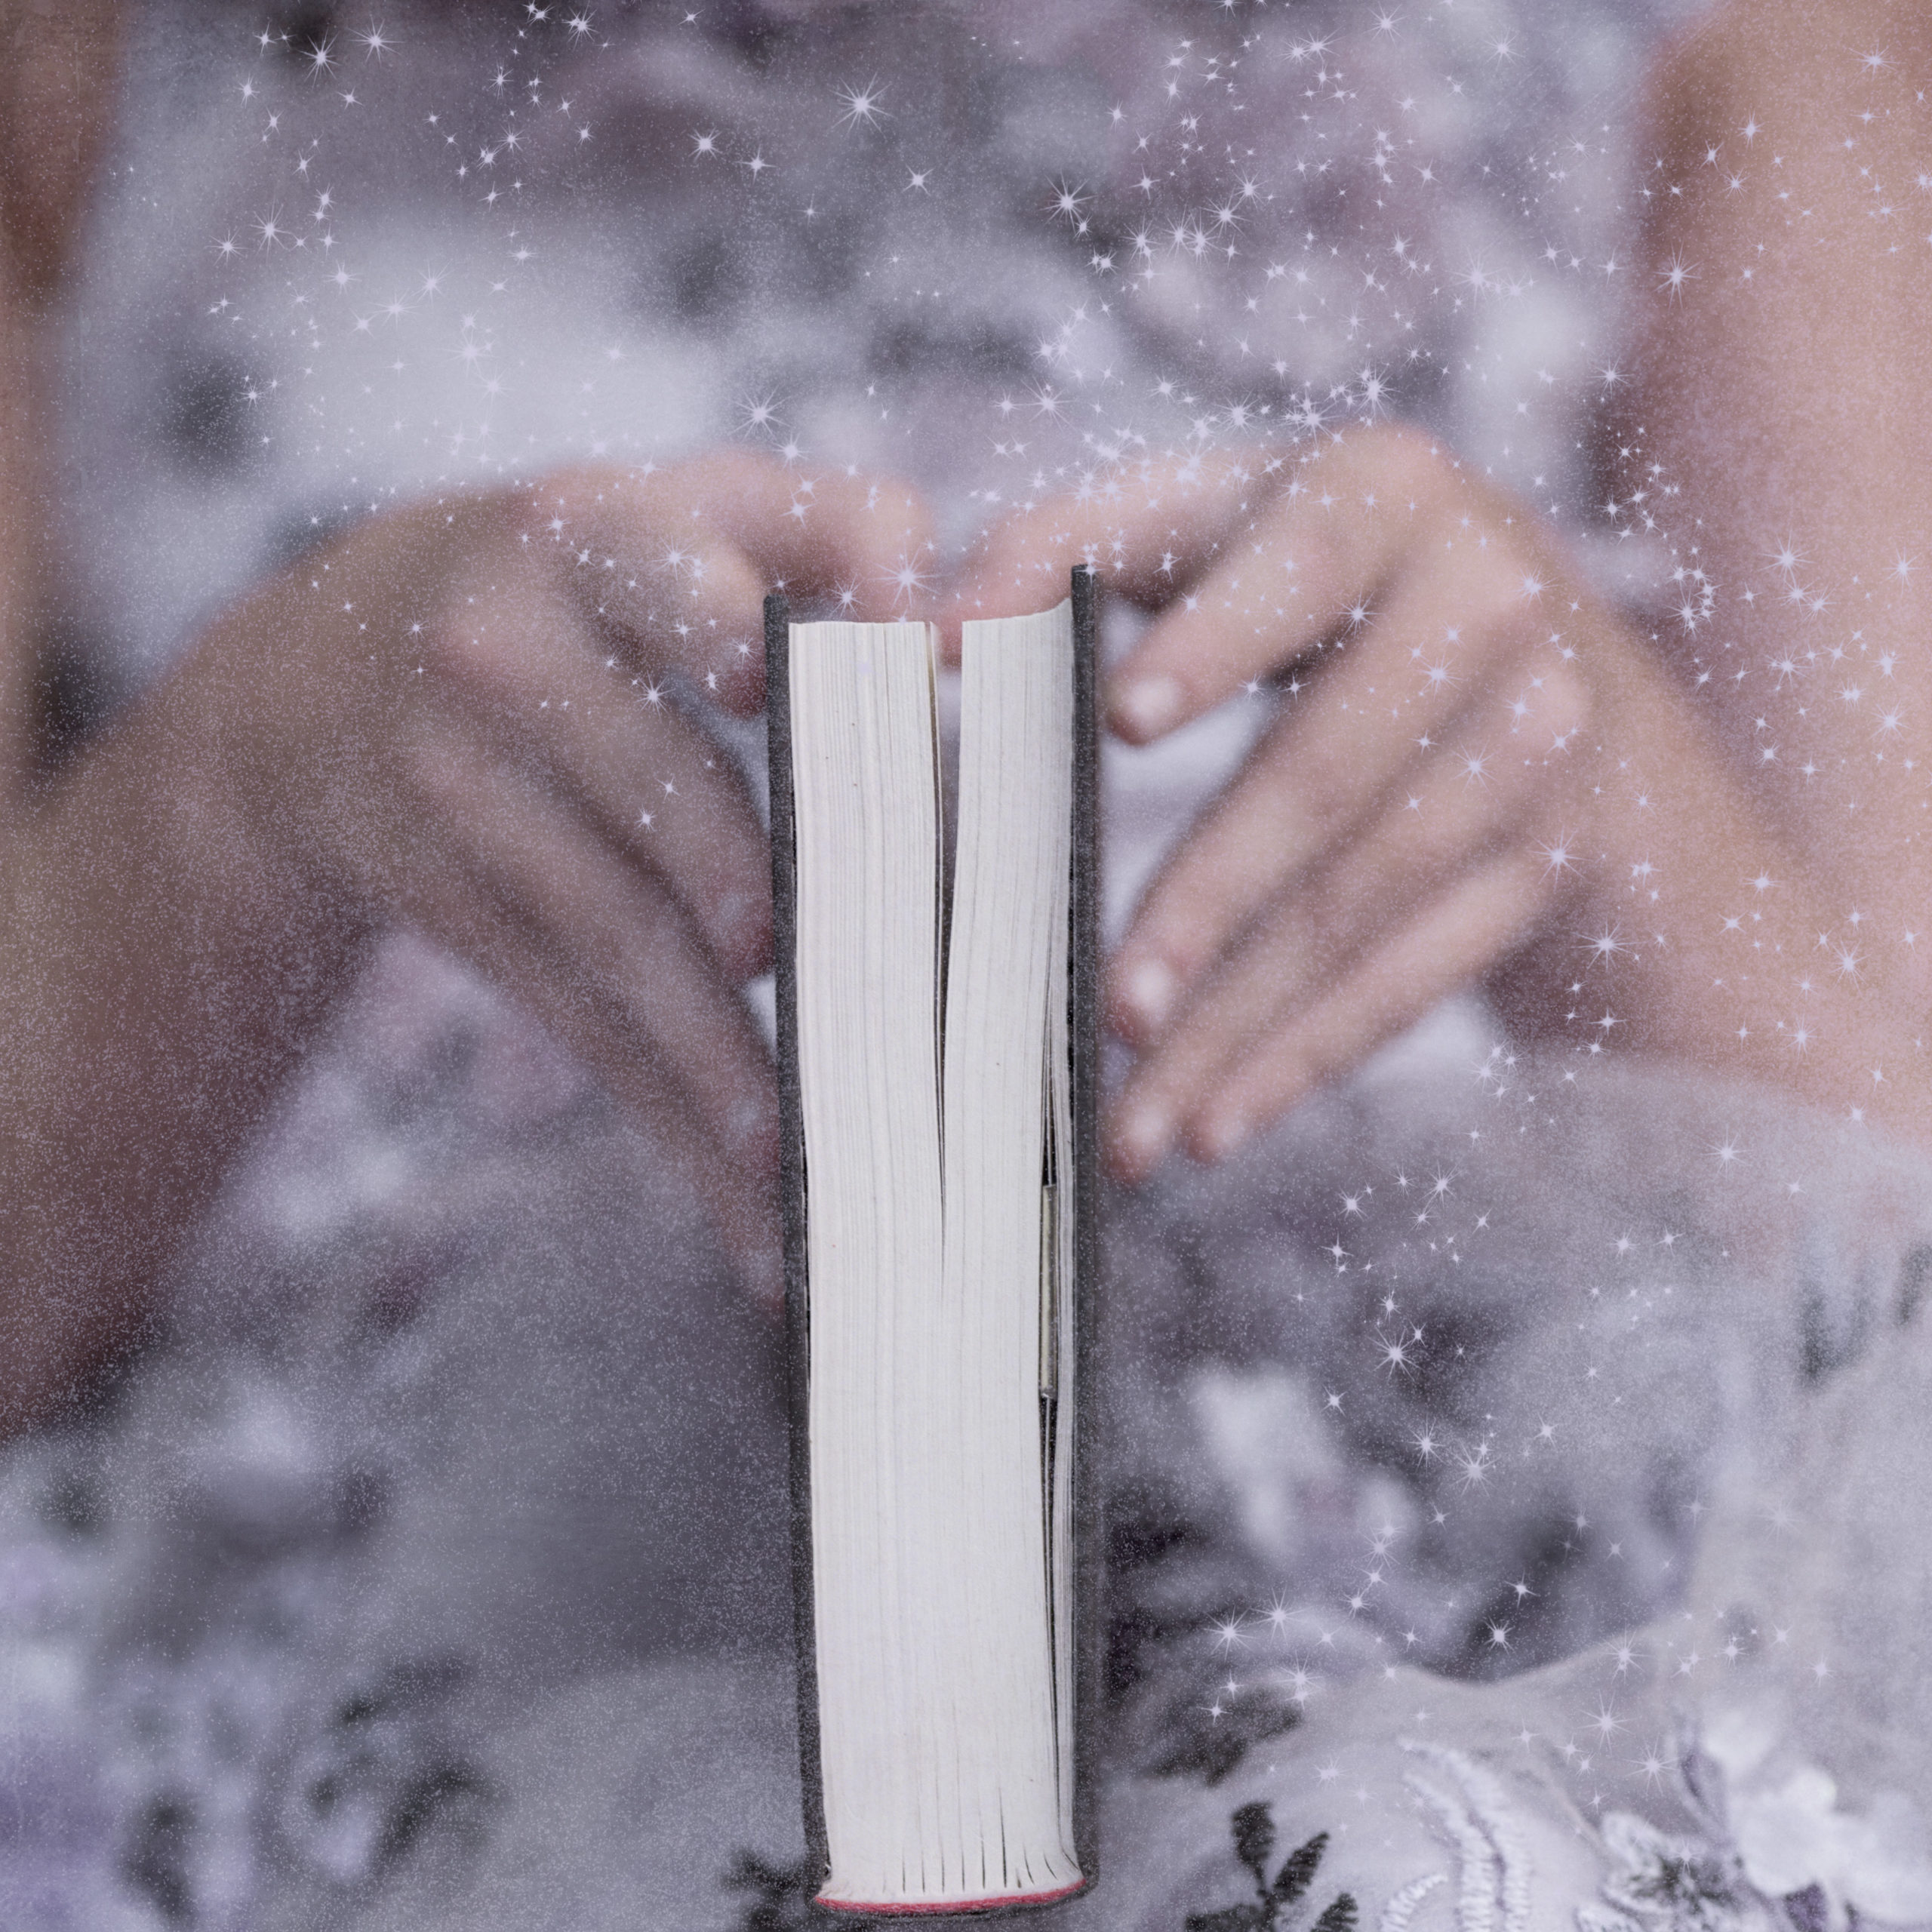 Photo of a girl's hands holding a closed book with magical sparkles all around. The girl is wearing a violet colored dress by Anna Triant Couture.